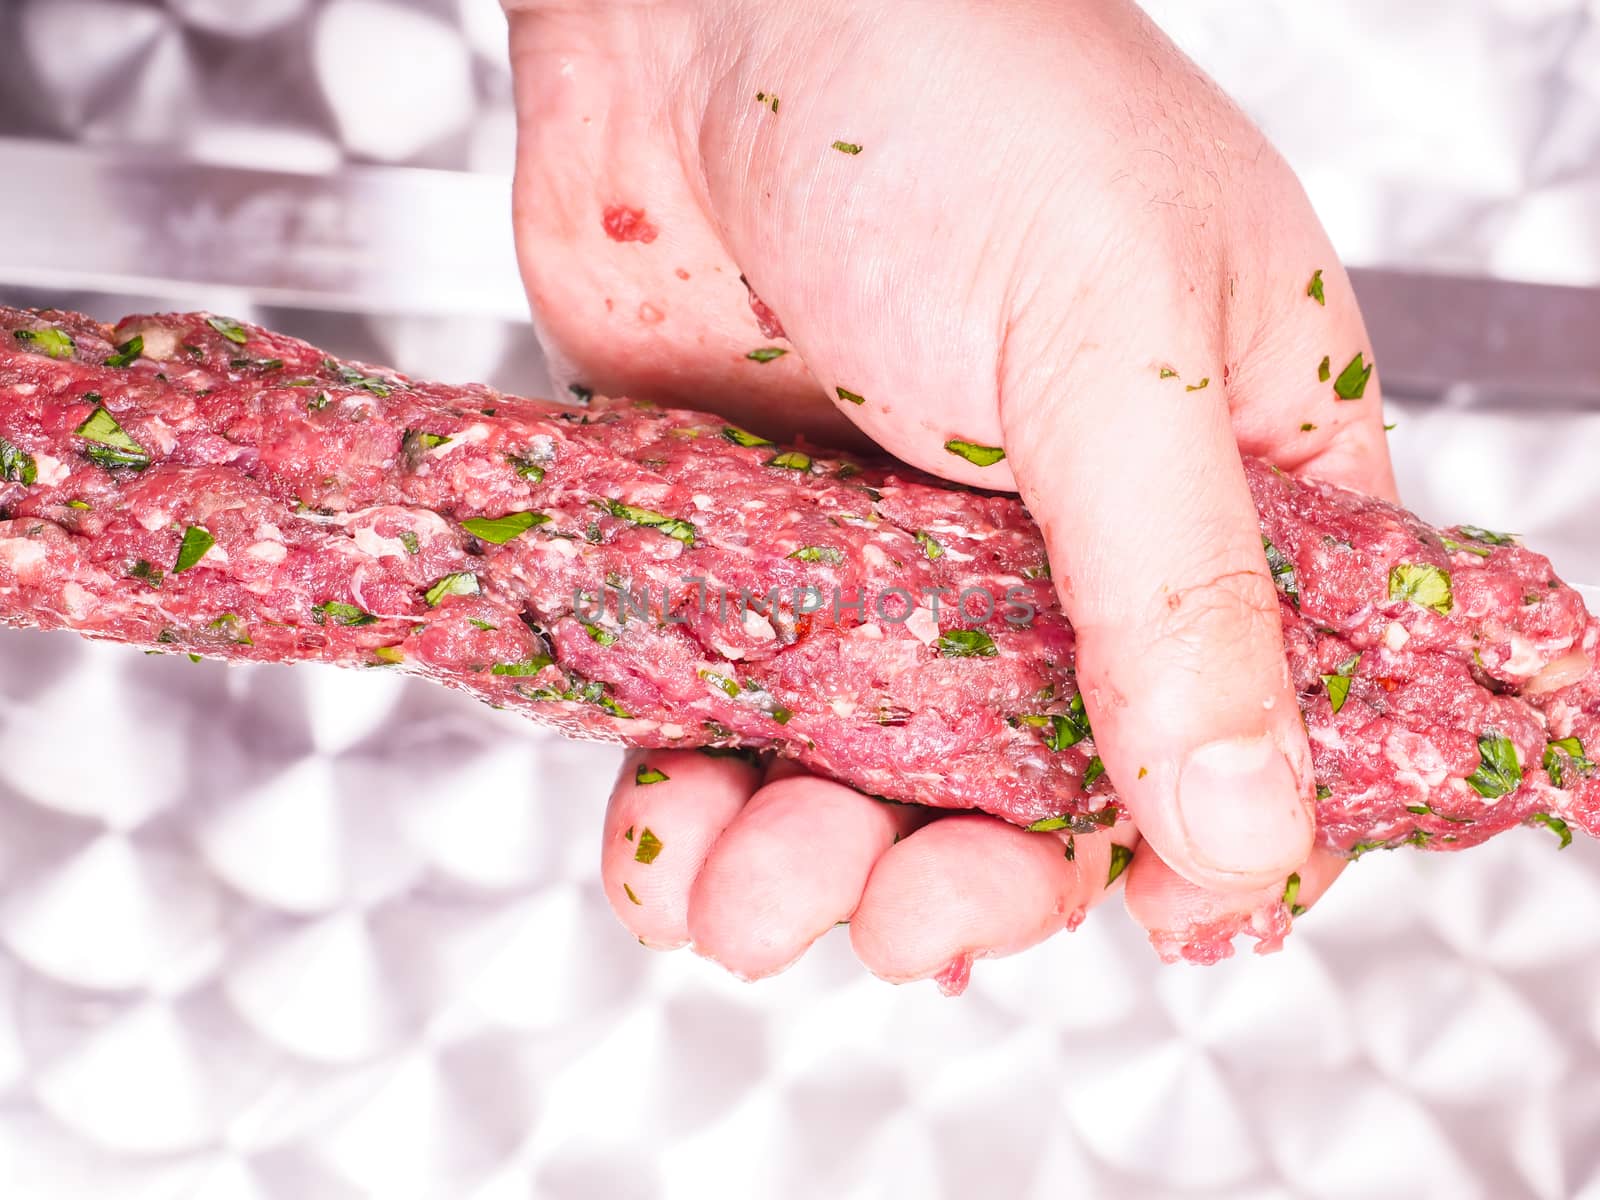 A chef making shish kebab of red meat with parsley over metal pl by Arvebettum